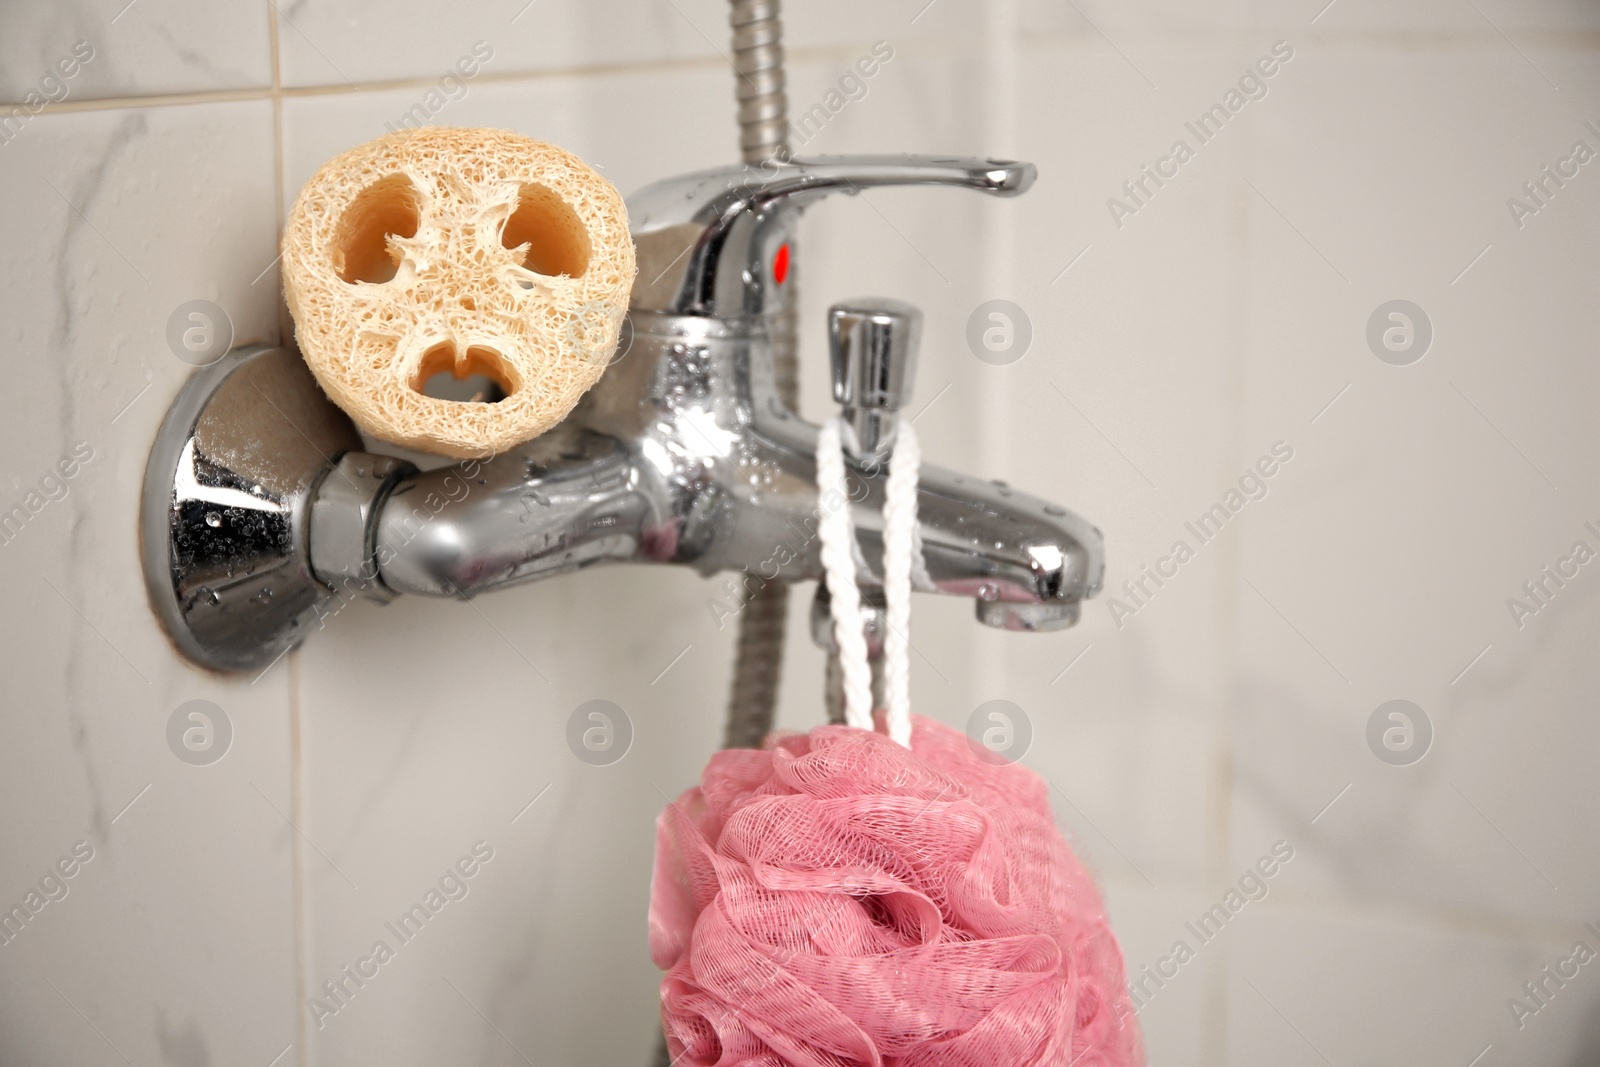 Photo of Different sponges on faucet in bathroom, closeup